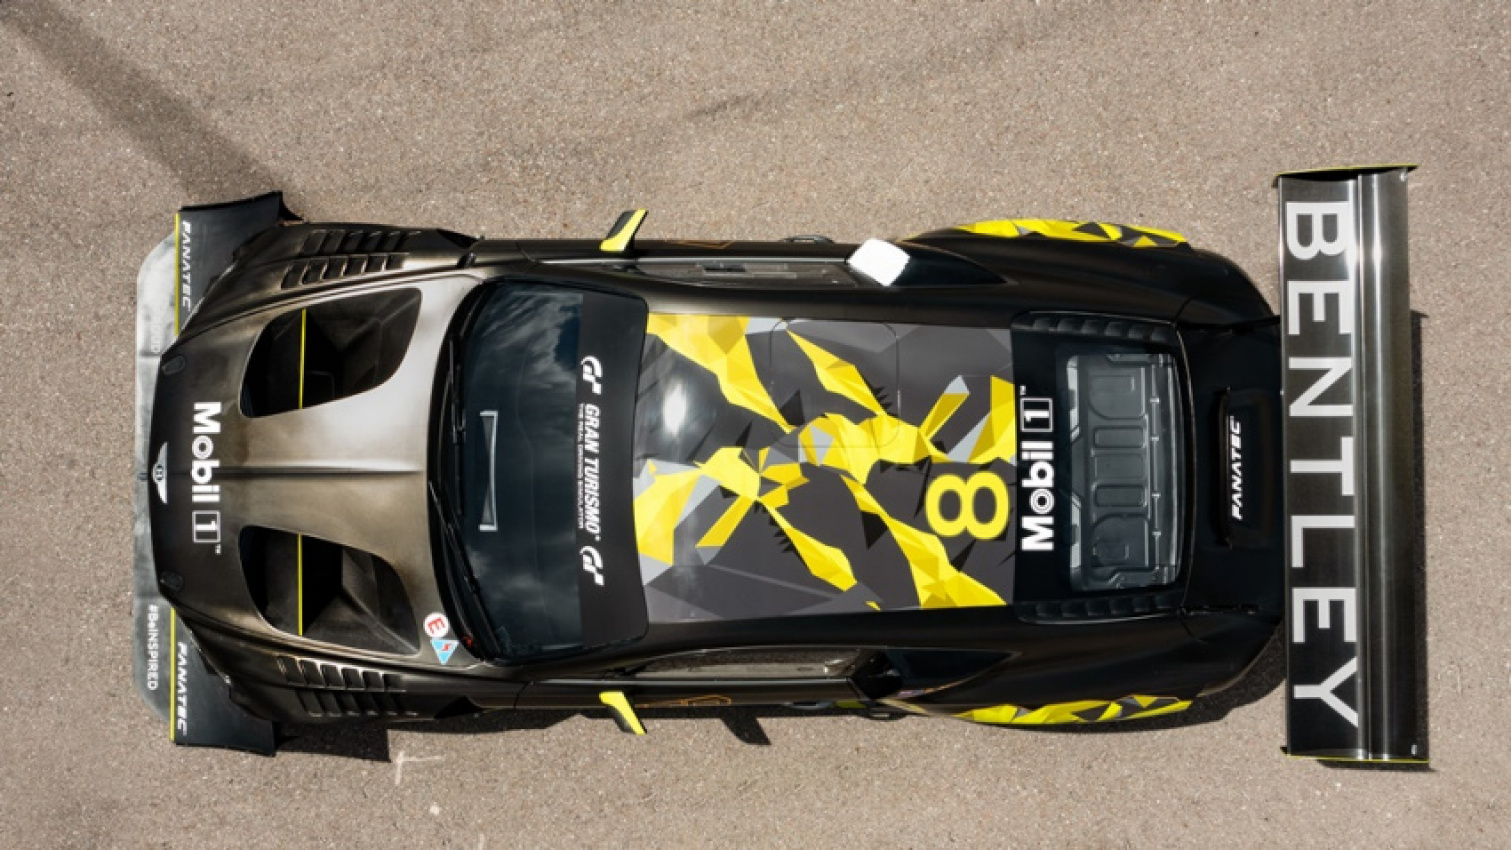 autos, bentley, cars, continental gt3, hillclimb, pikes peak international hill climb, renewable fuels, rhys millen, bentley aiming for a third record at pikes peak international hill climb this month with continental gt3